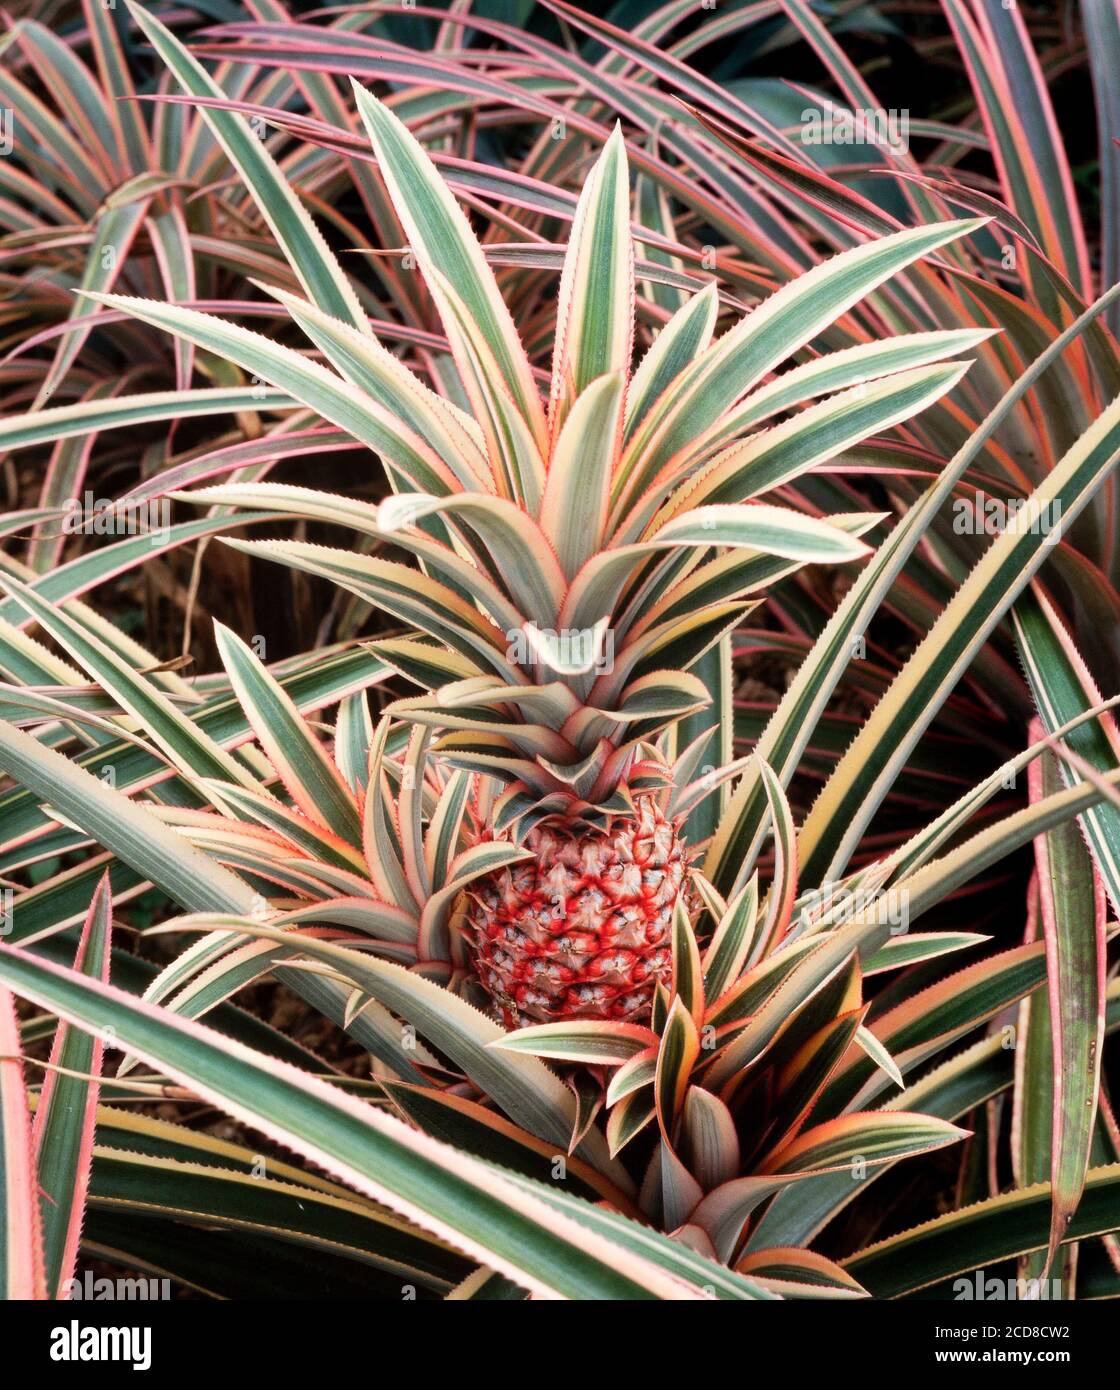 Pineapple fruit, young fruit growing on the plant, Anenas comosus Stock Photo